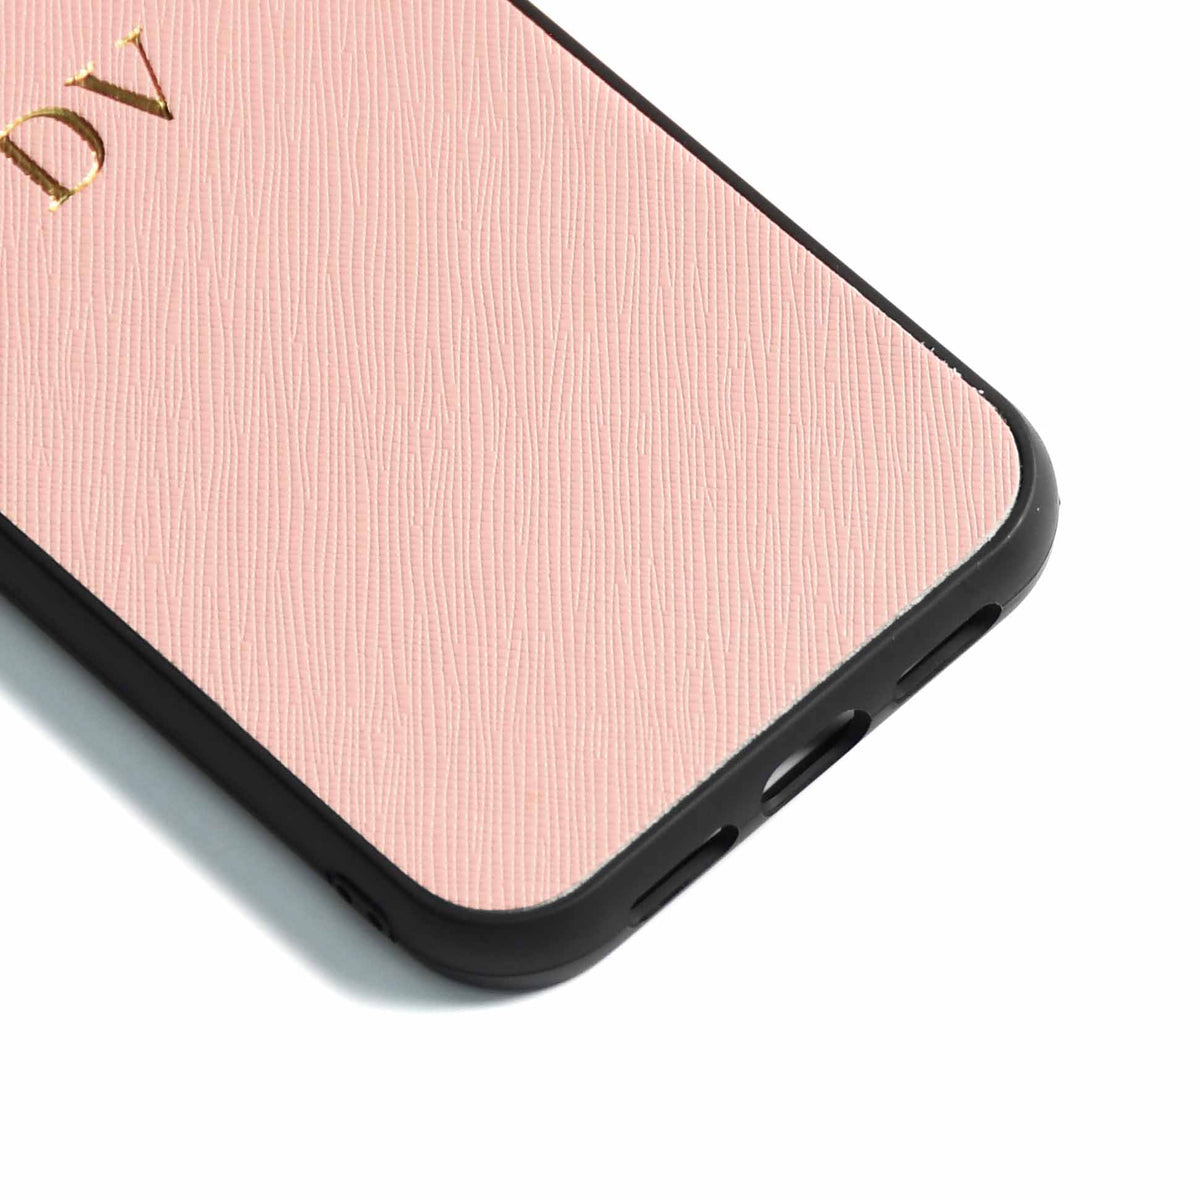 Samsung S10 - Pink Molly - Personalizable